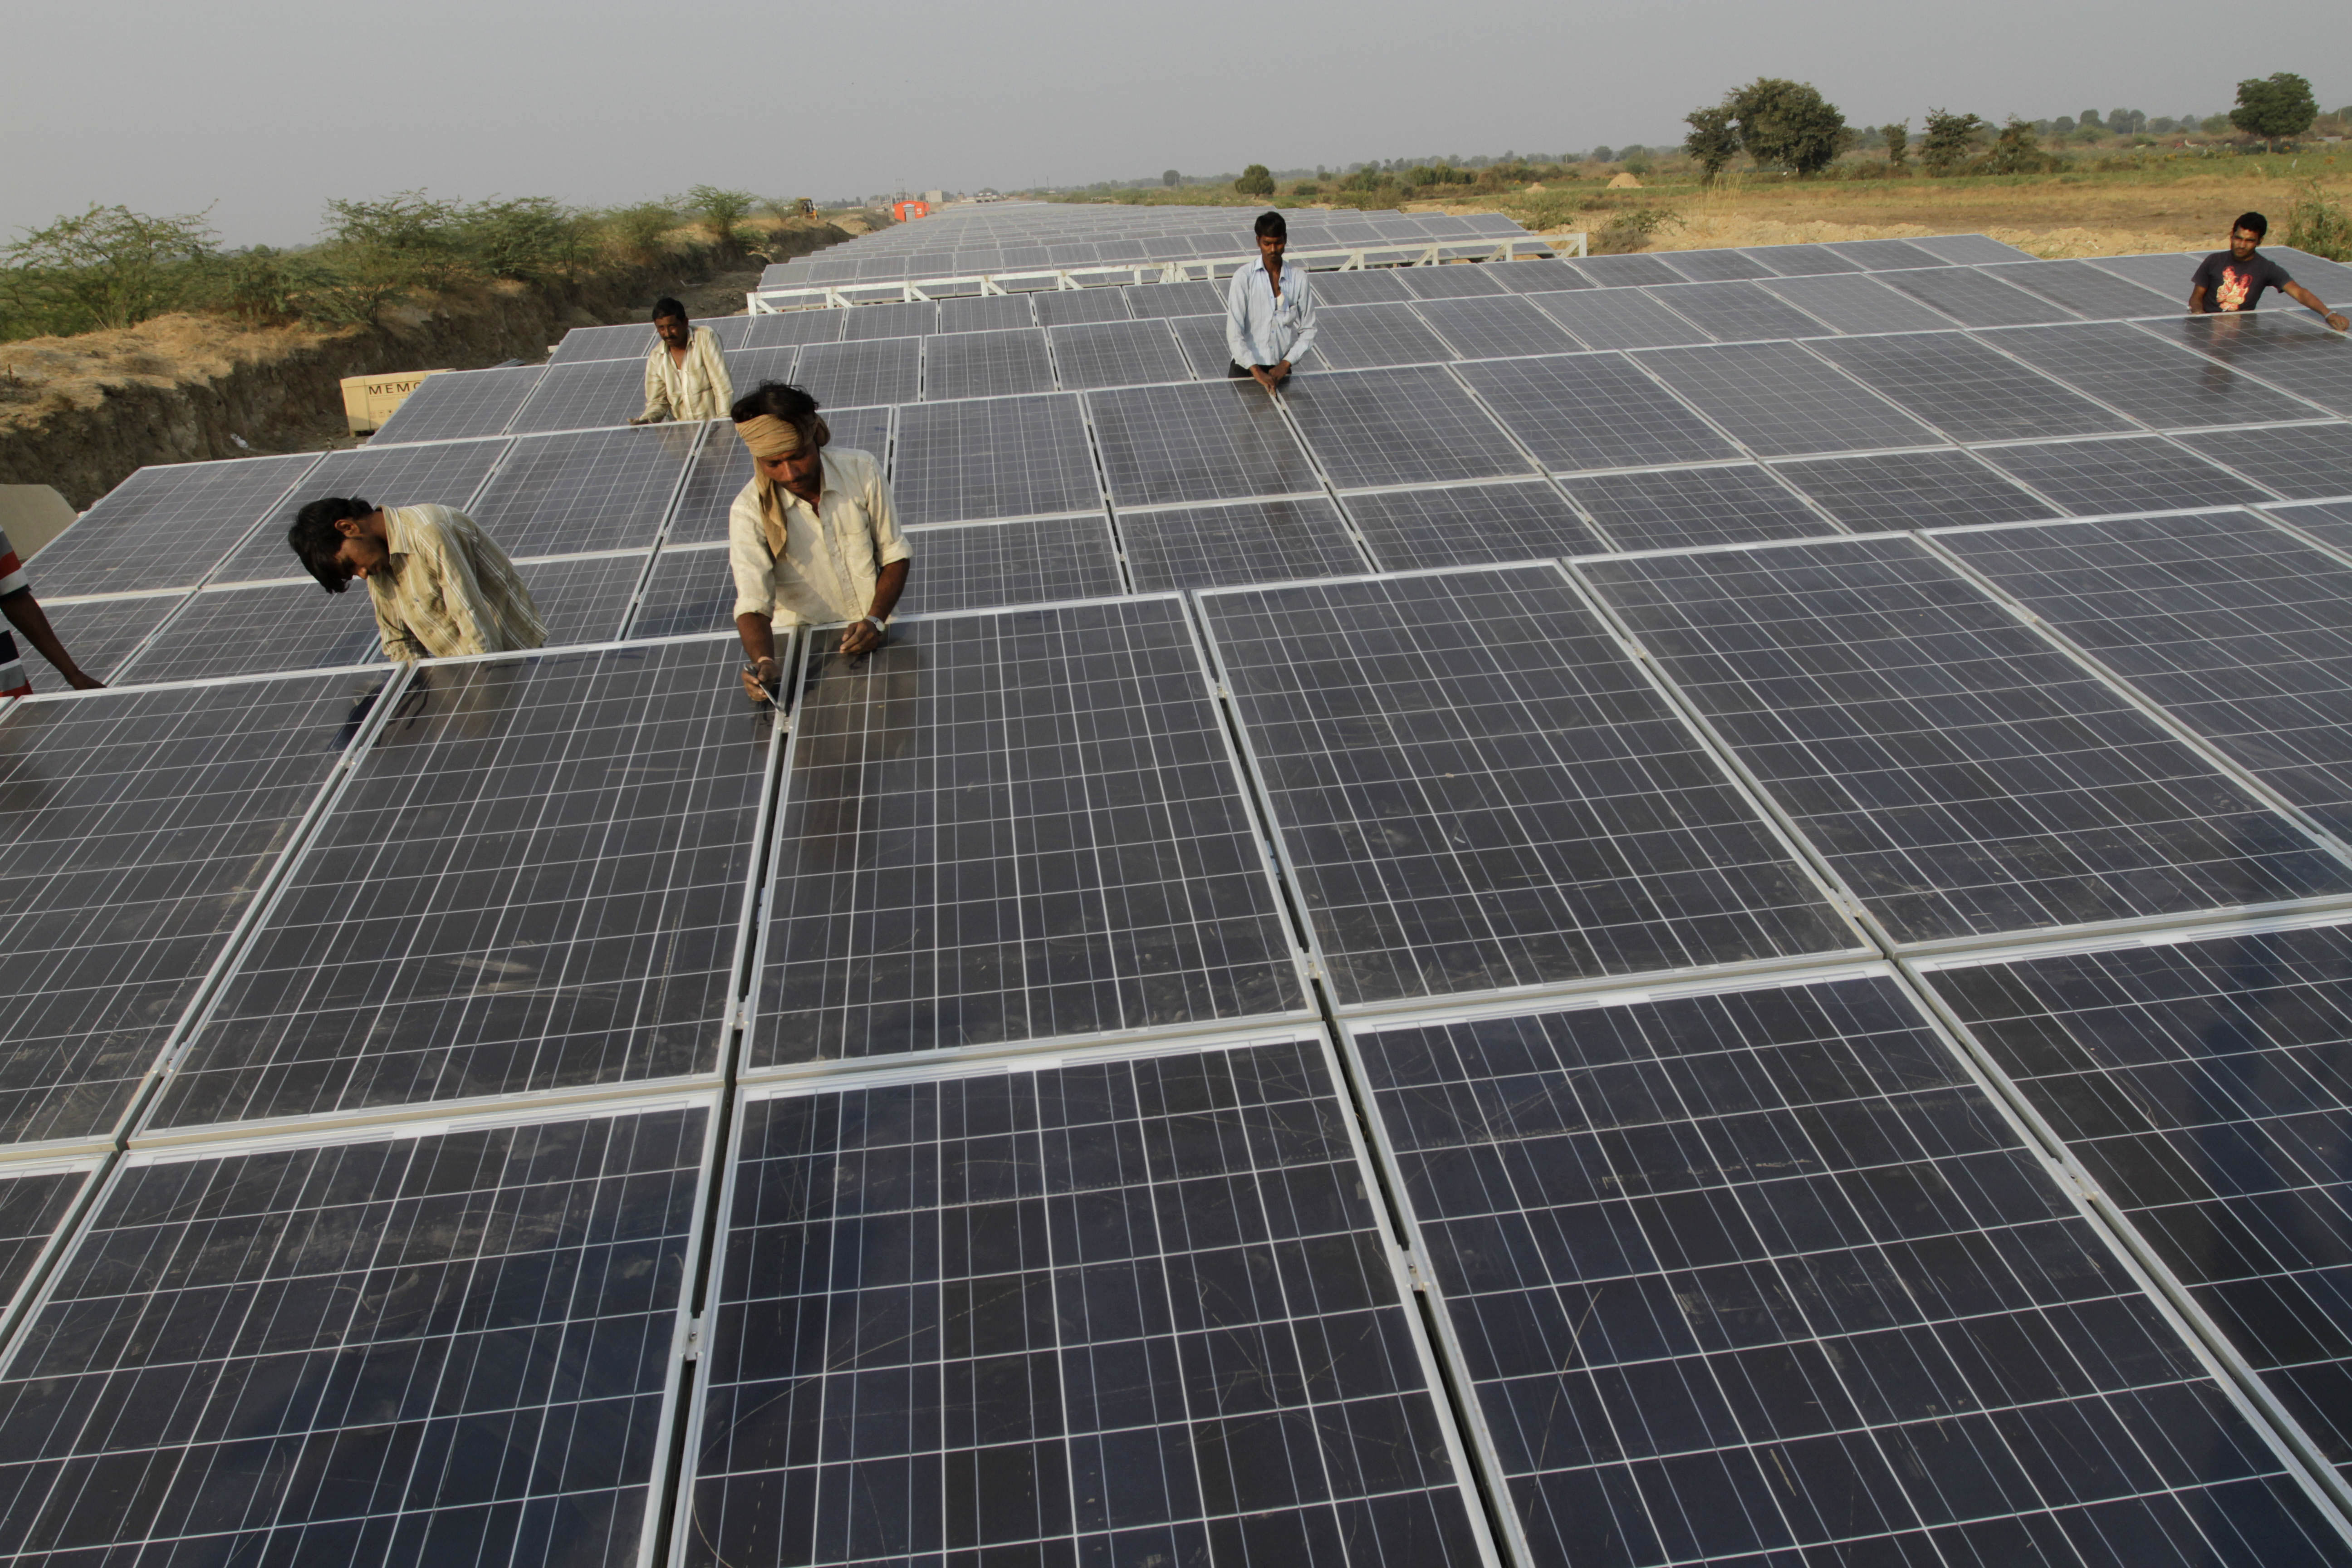 Russia is looking to make major inroads into India’s solar energy sector. Source: AP